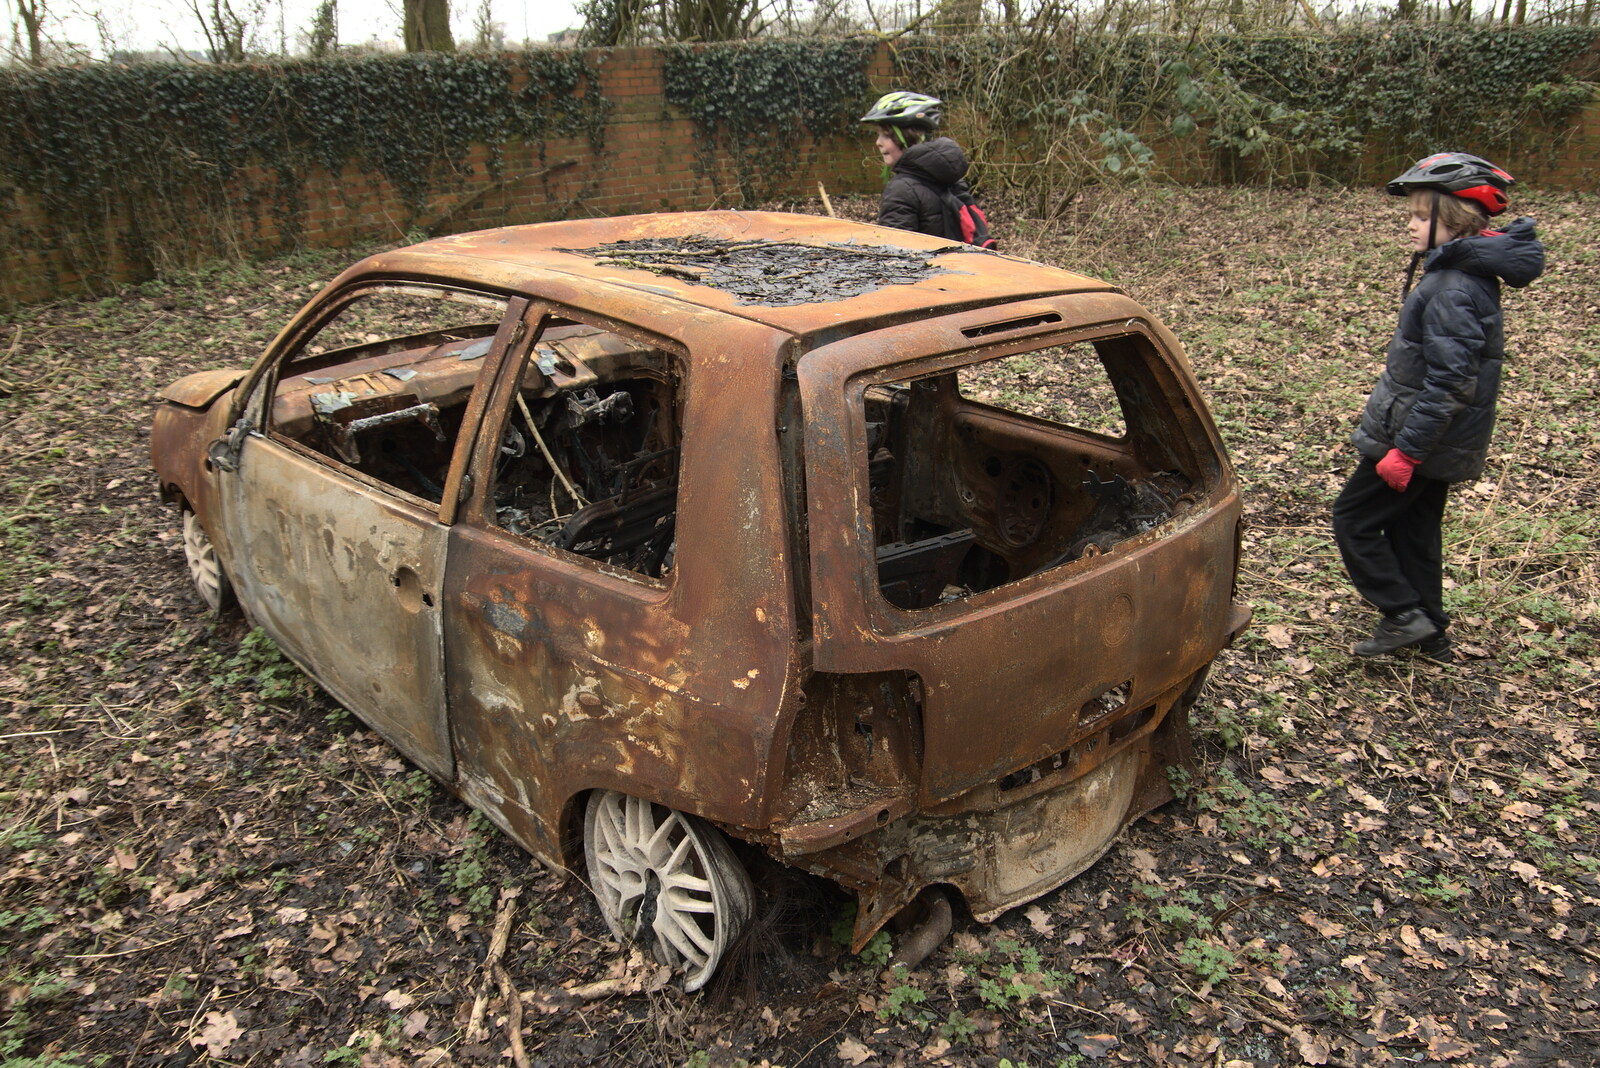 The boys inspect a burned-out car from The Old Sewage Works, The Avenue, Brome, Suffolk - 20th February 2021